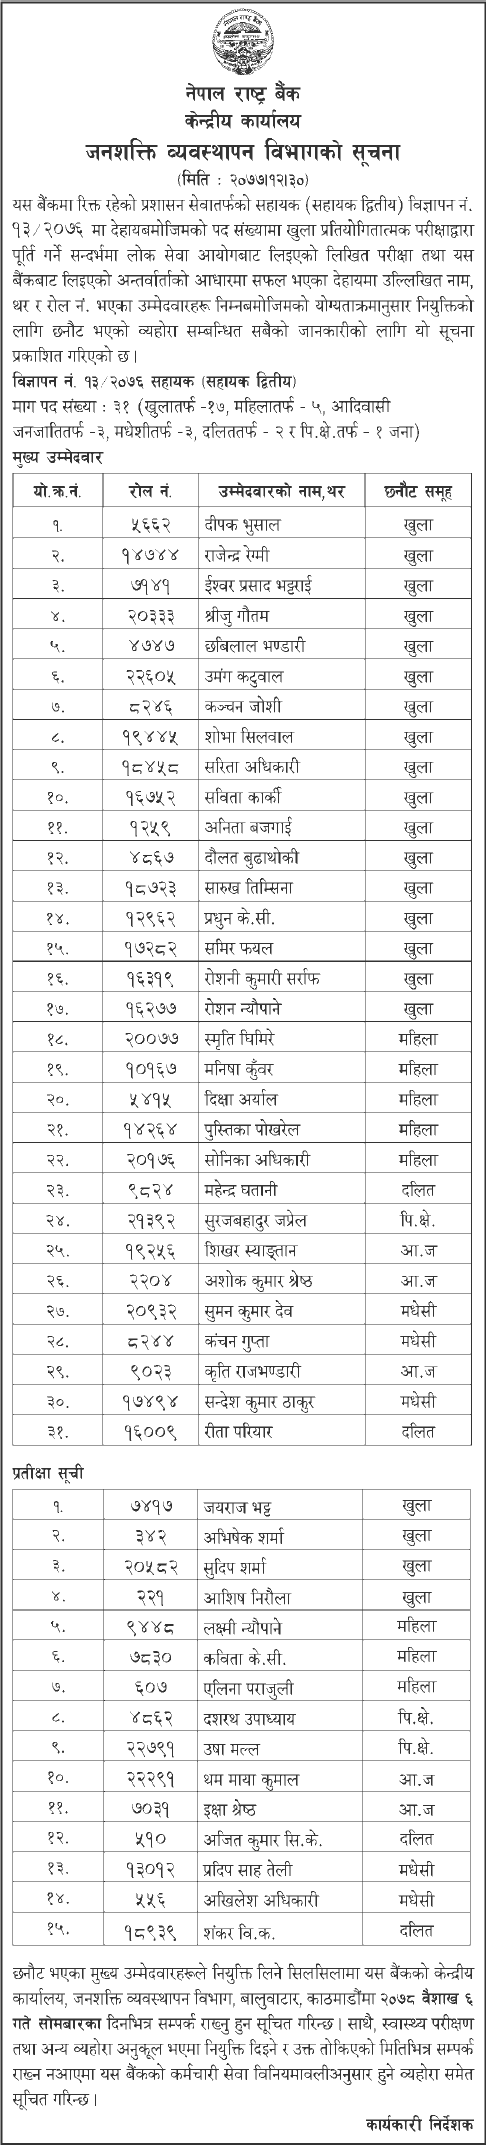 Nepal Rastra Bank Published Final Result and Appointment of Assistant Second Class